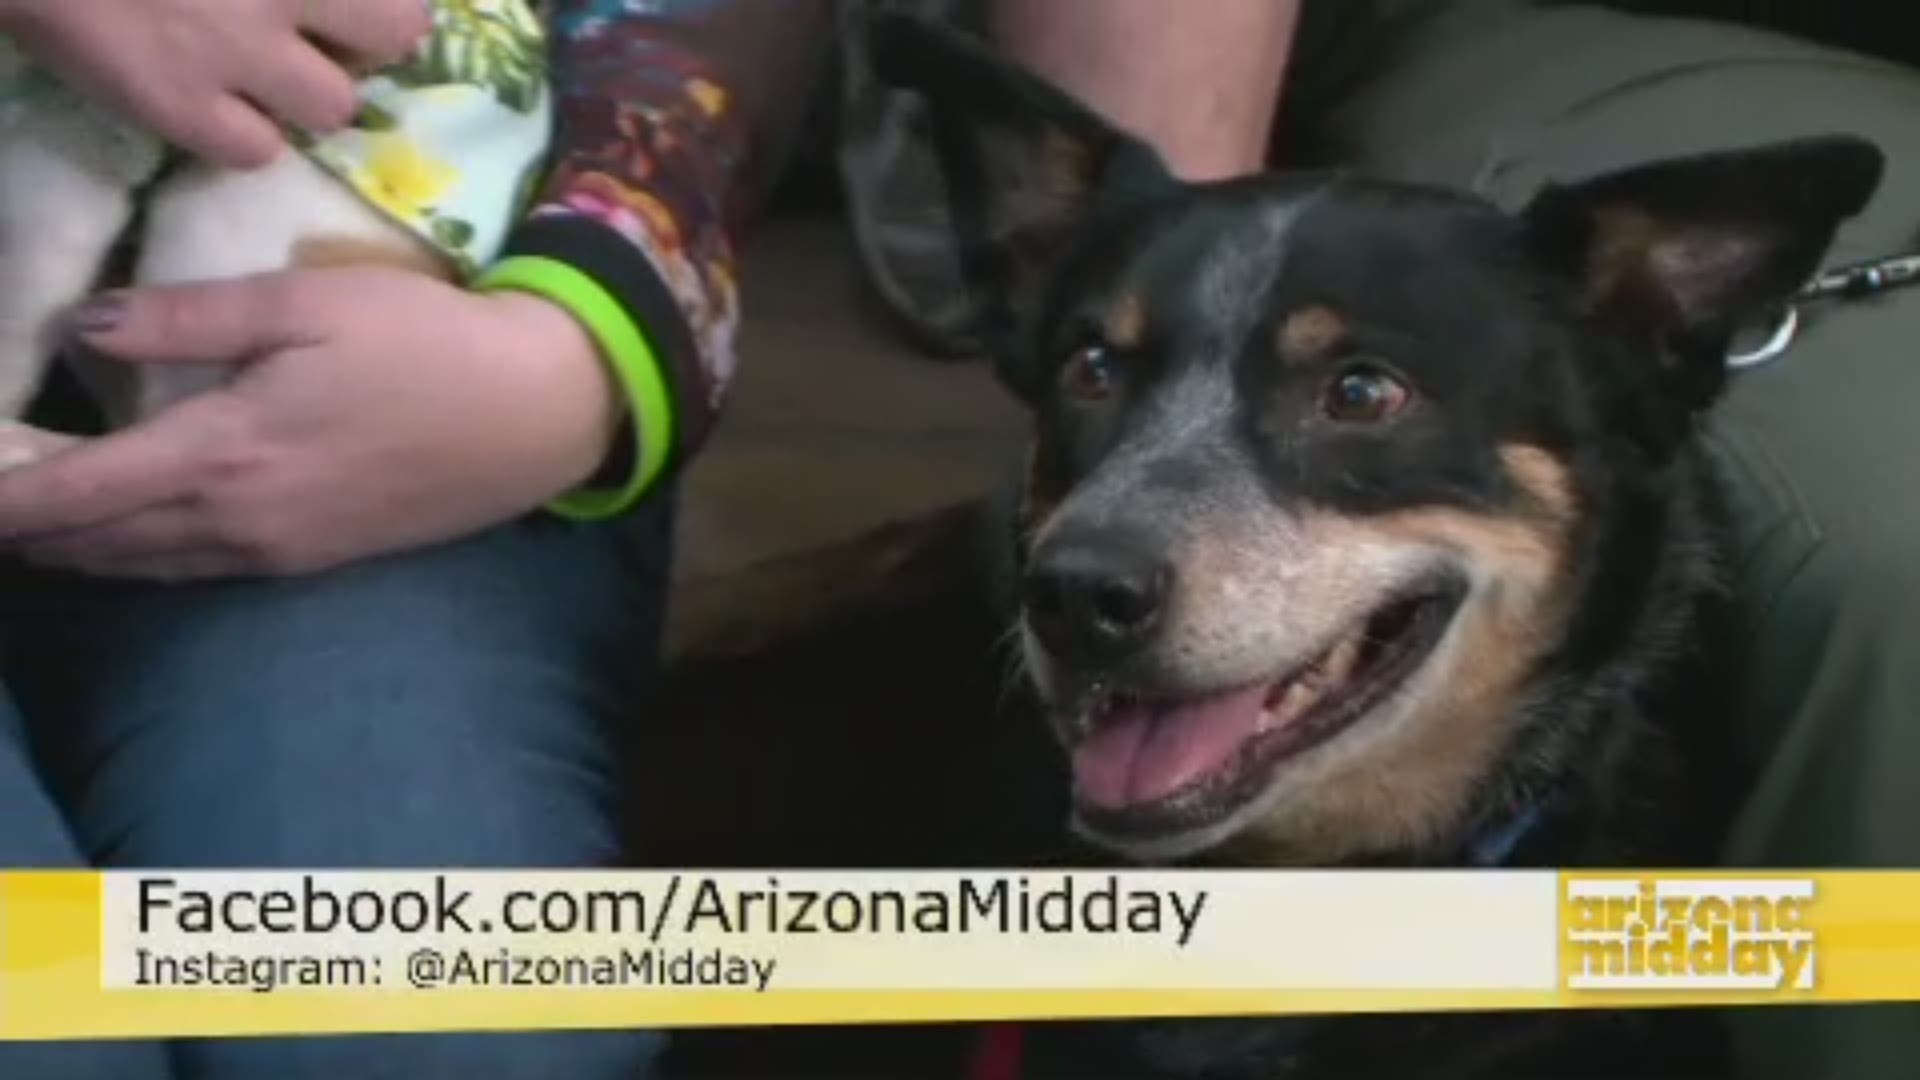 PACC911 brings us some furry friends that are up for adoption this weekend in Anthem!